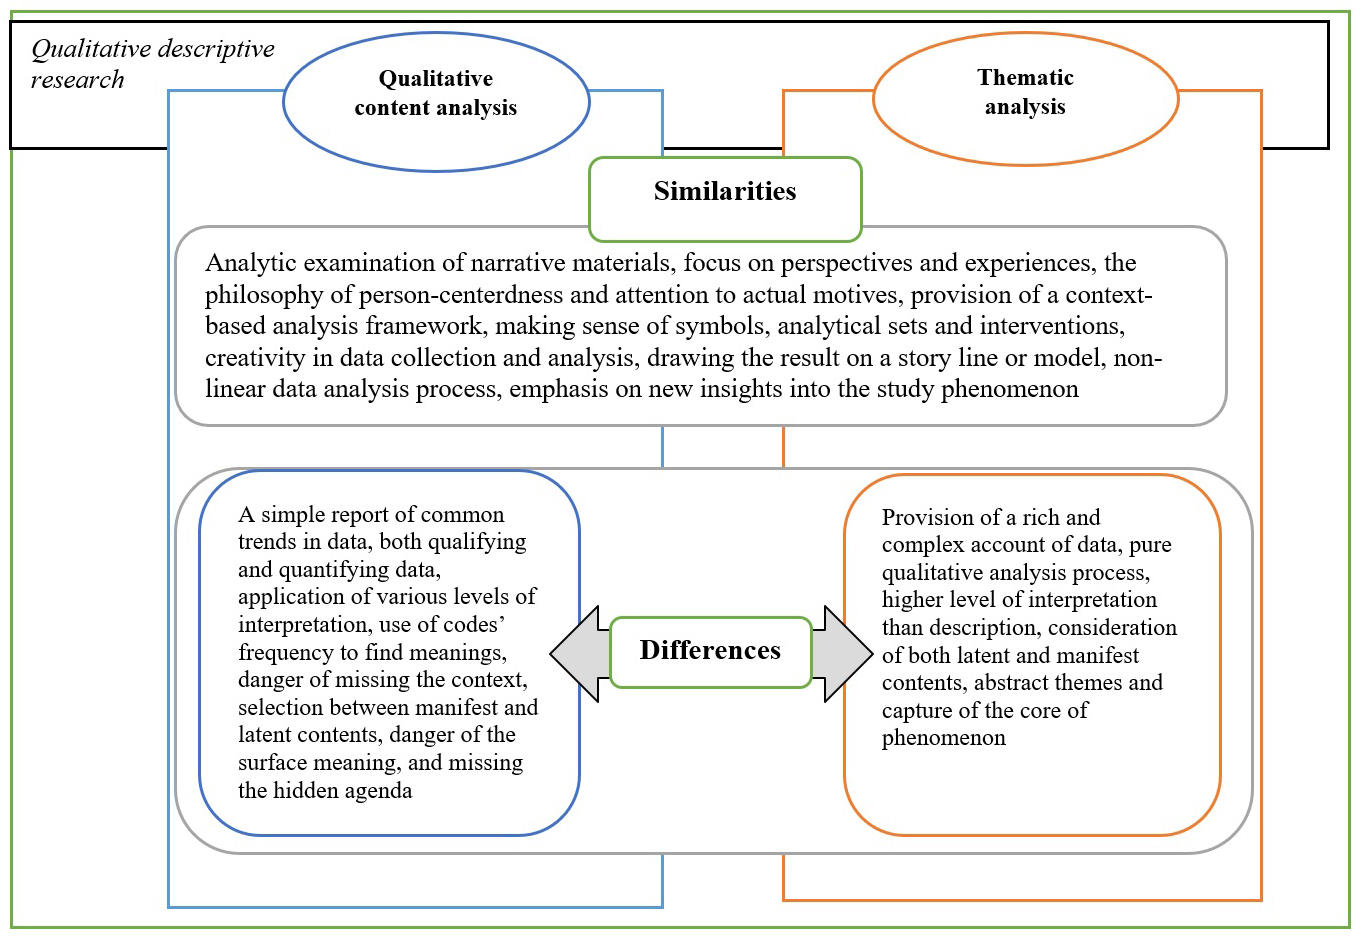 Theme In Qualitative Content Analysis And Thematic Analysis